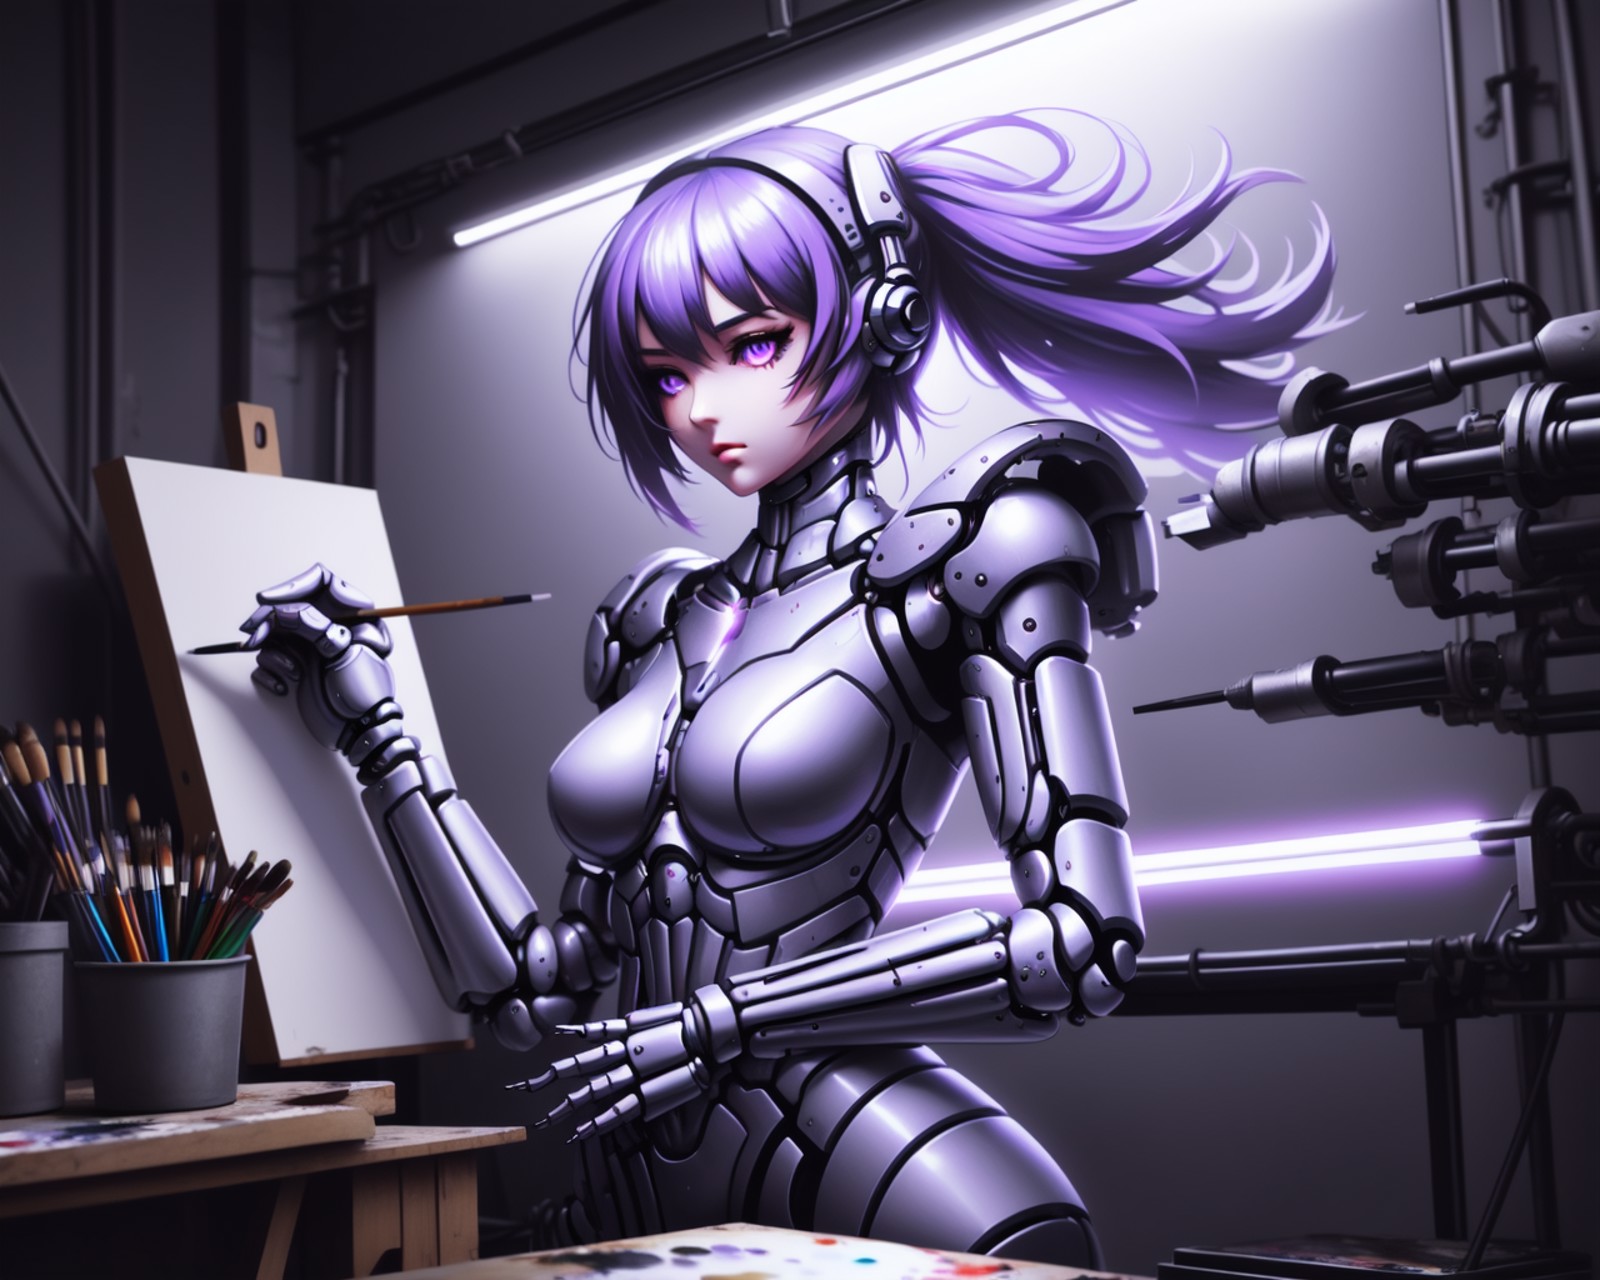 <lora:artist_hands_v2:0.5>, detailed purple cyberpunk android shaped illustration, holding paintbrush, painting (action), ...